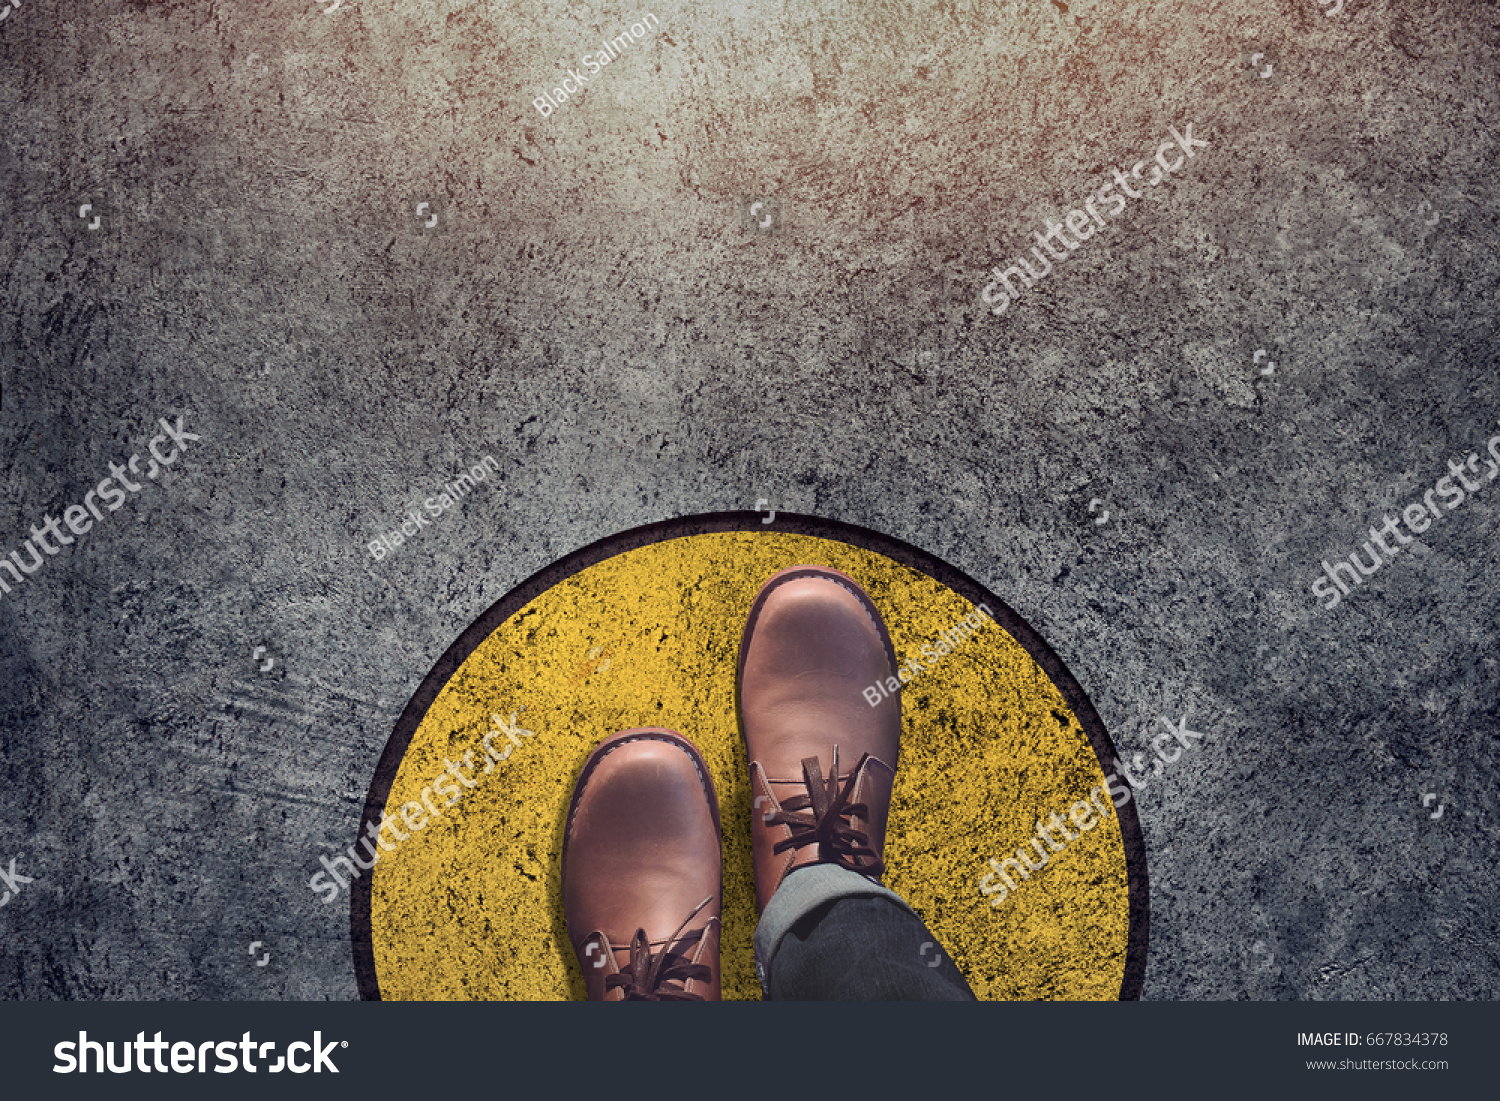 Comfort Zone concept, Male with leather shoes steps over circle line to outside bound, Top view and Dark tone, Grunge Dirty Concrete Floor as Background
 #667834378